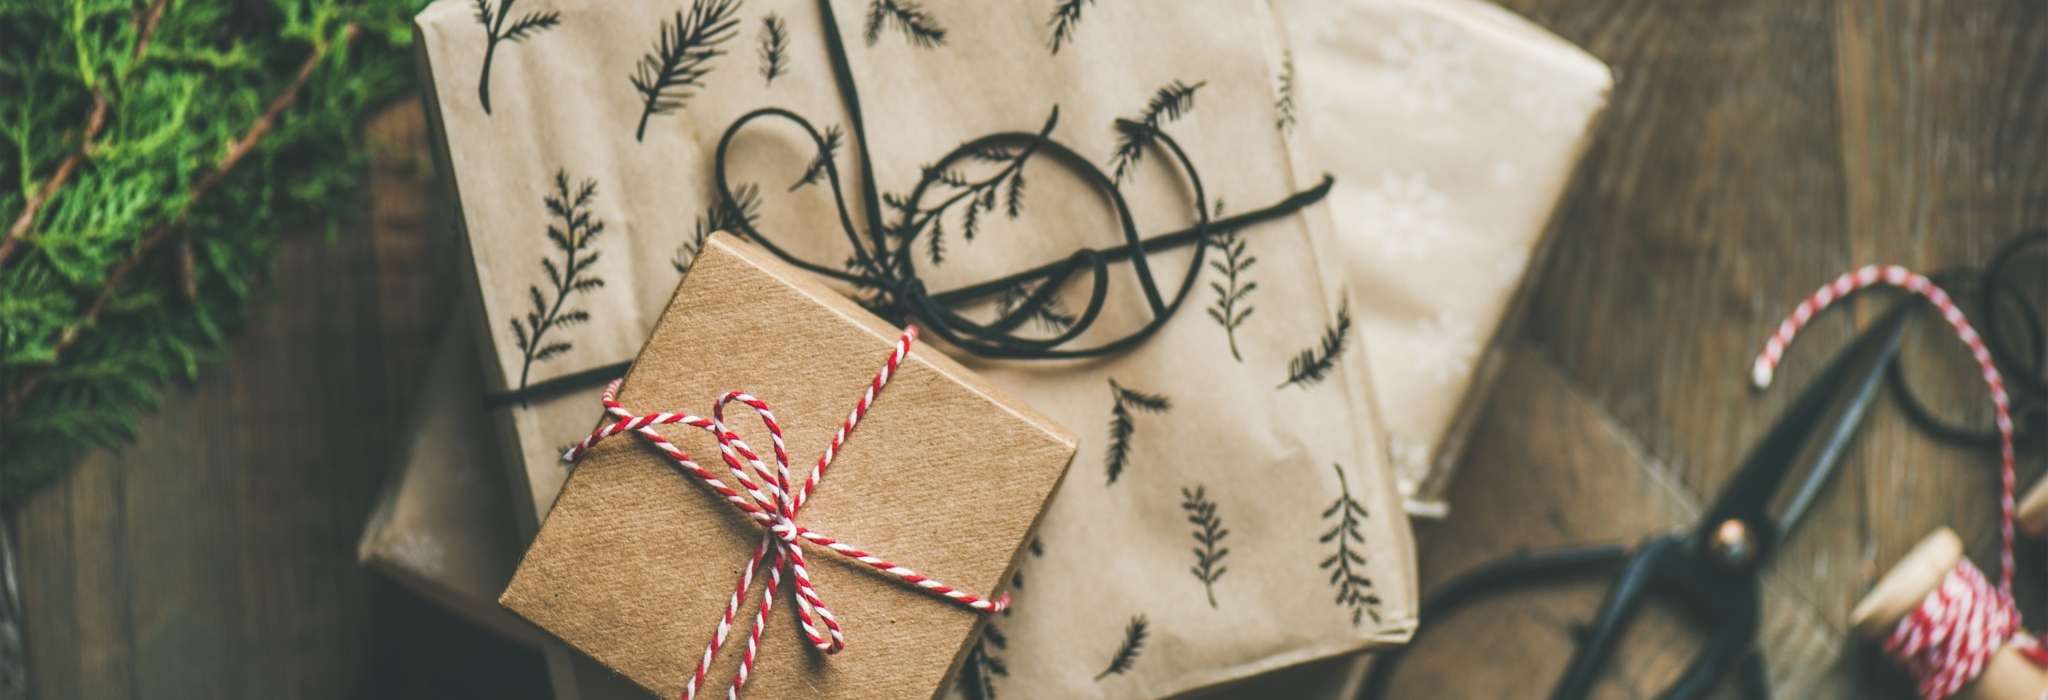 a pile of presents wrapped in brown paper and tied with red and white string are piled together on a wooden surface.